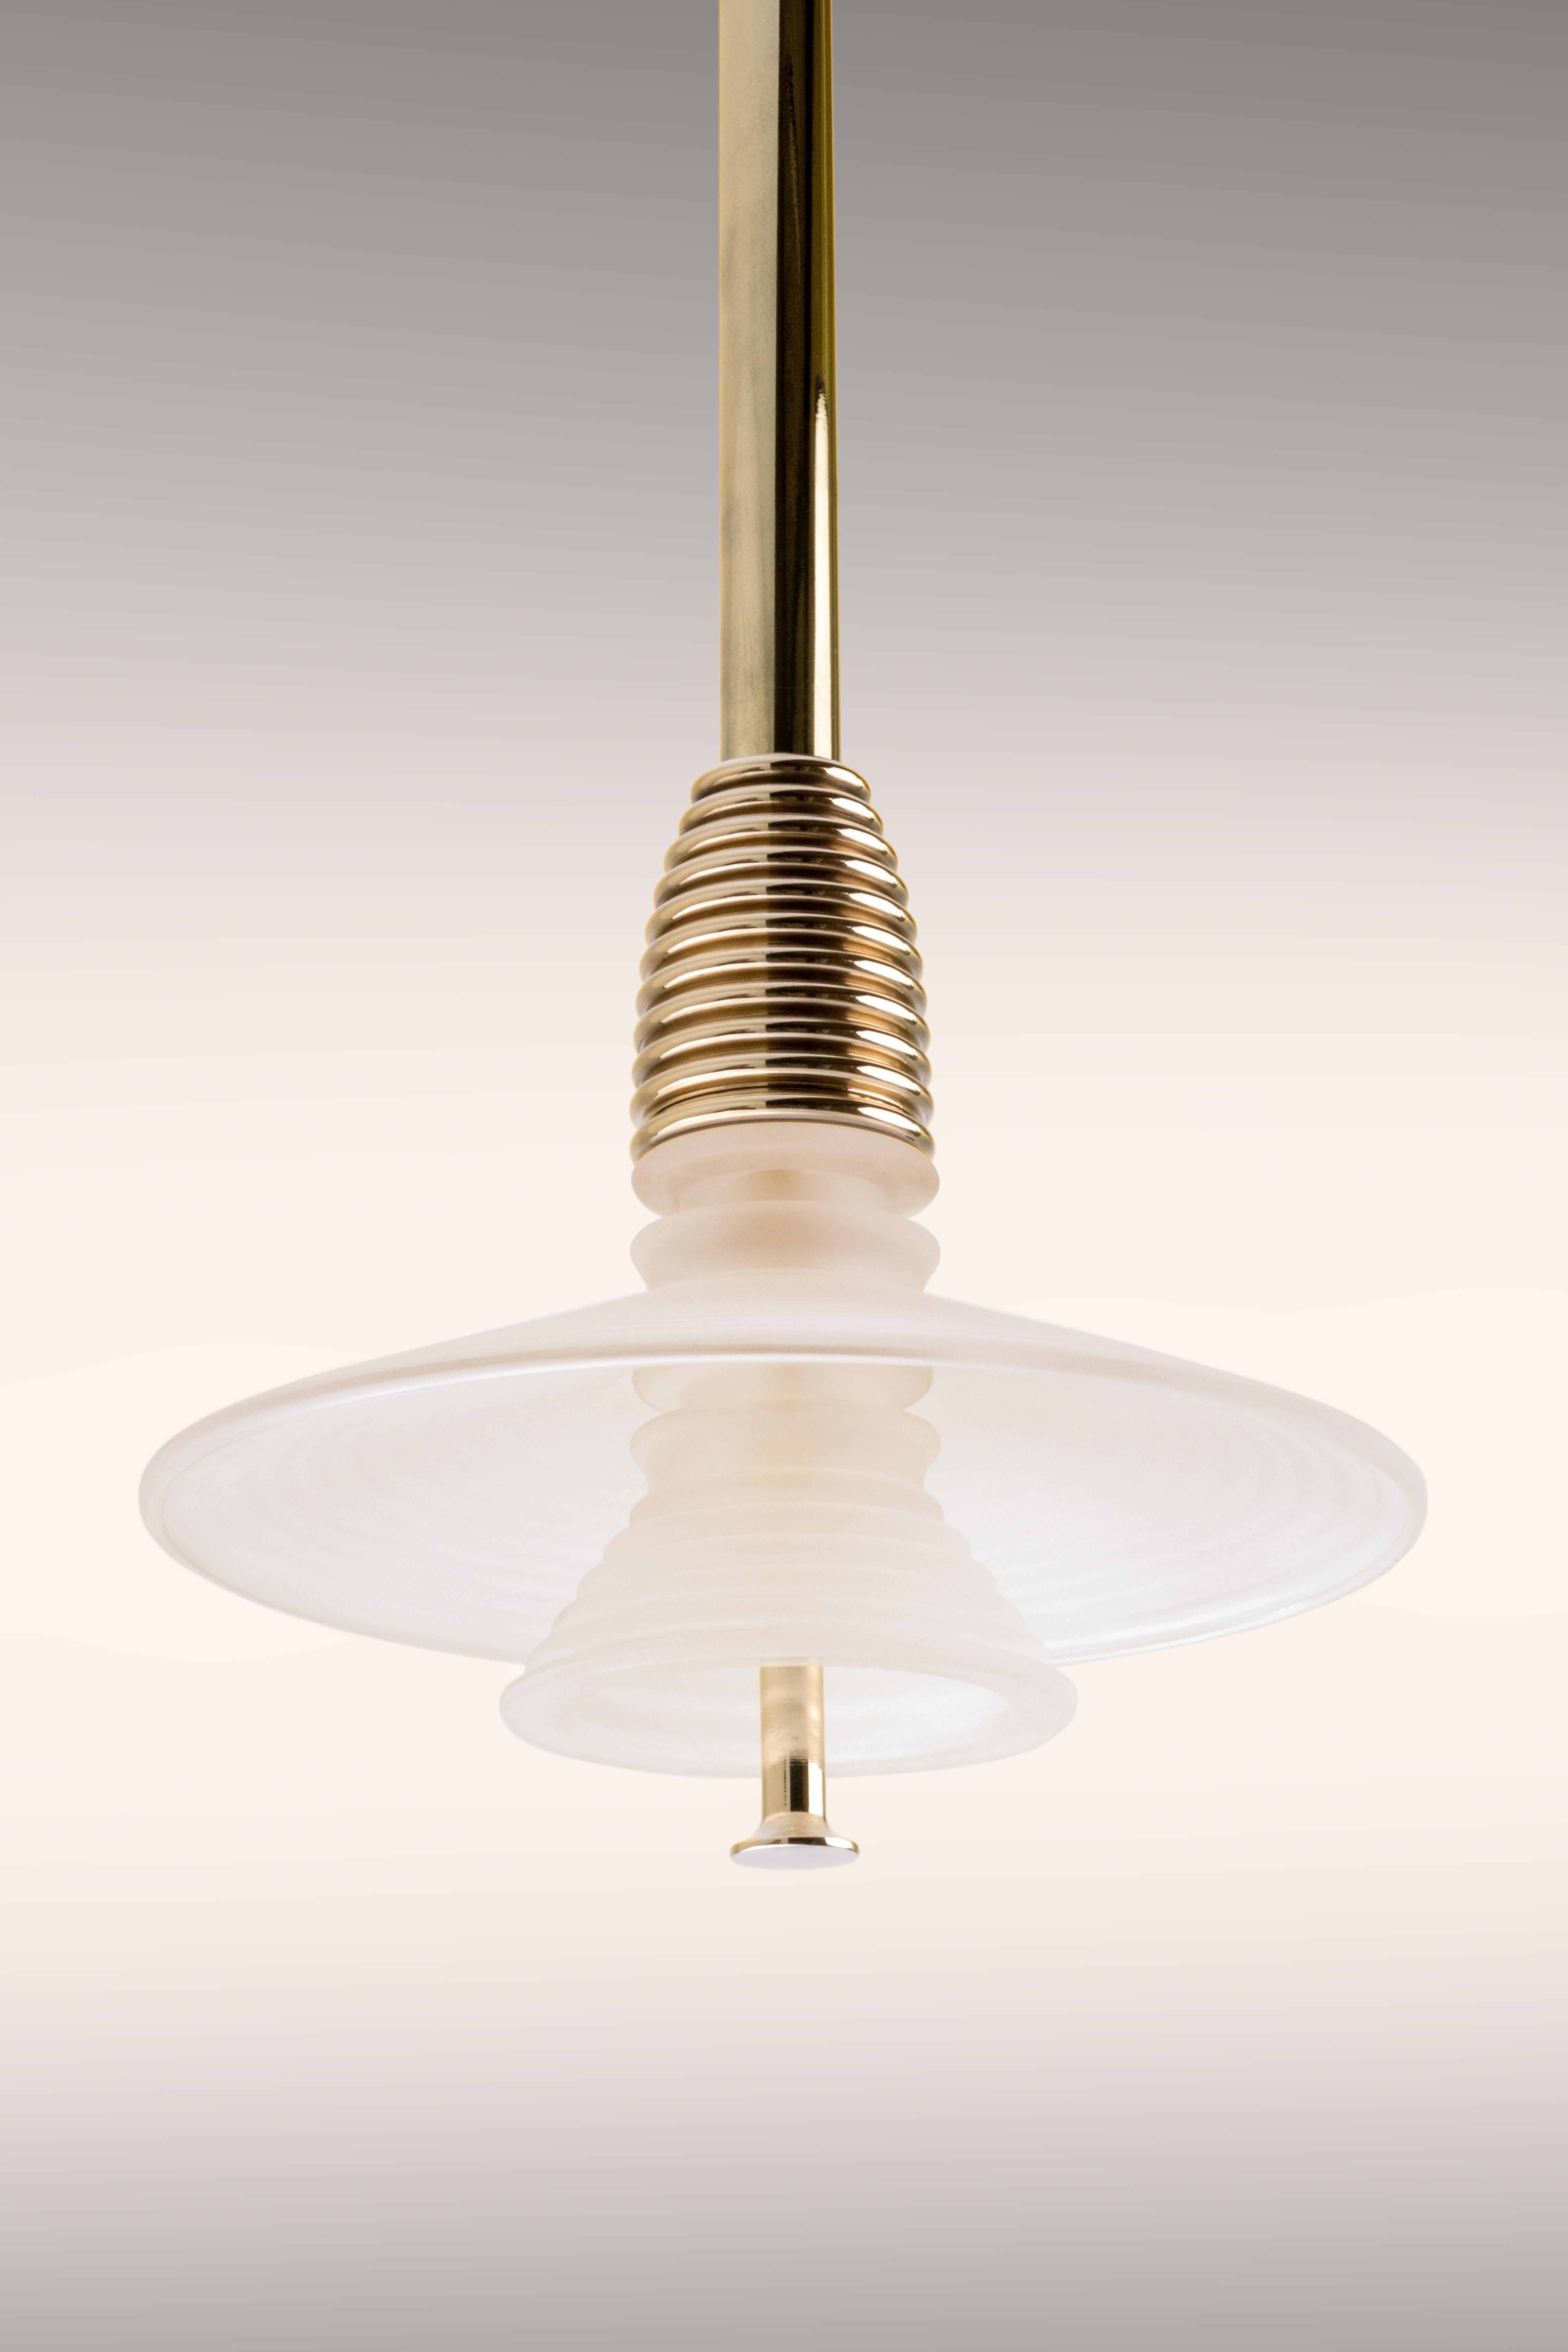 British The Insulator 'AB' Pendant in polished brass and clear glass by NOVOCASTRIAN For Sale